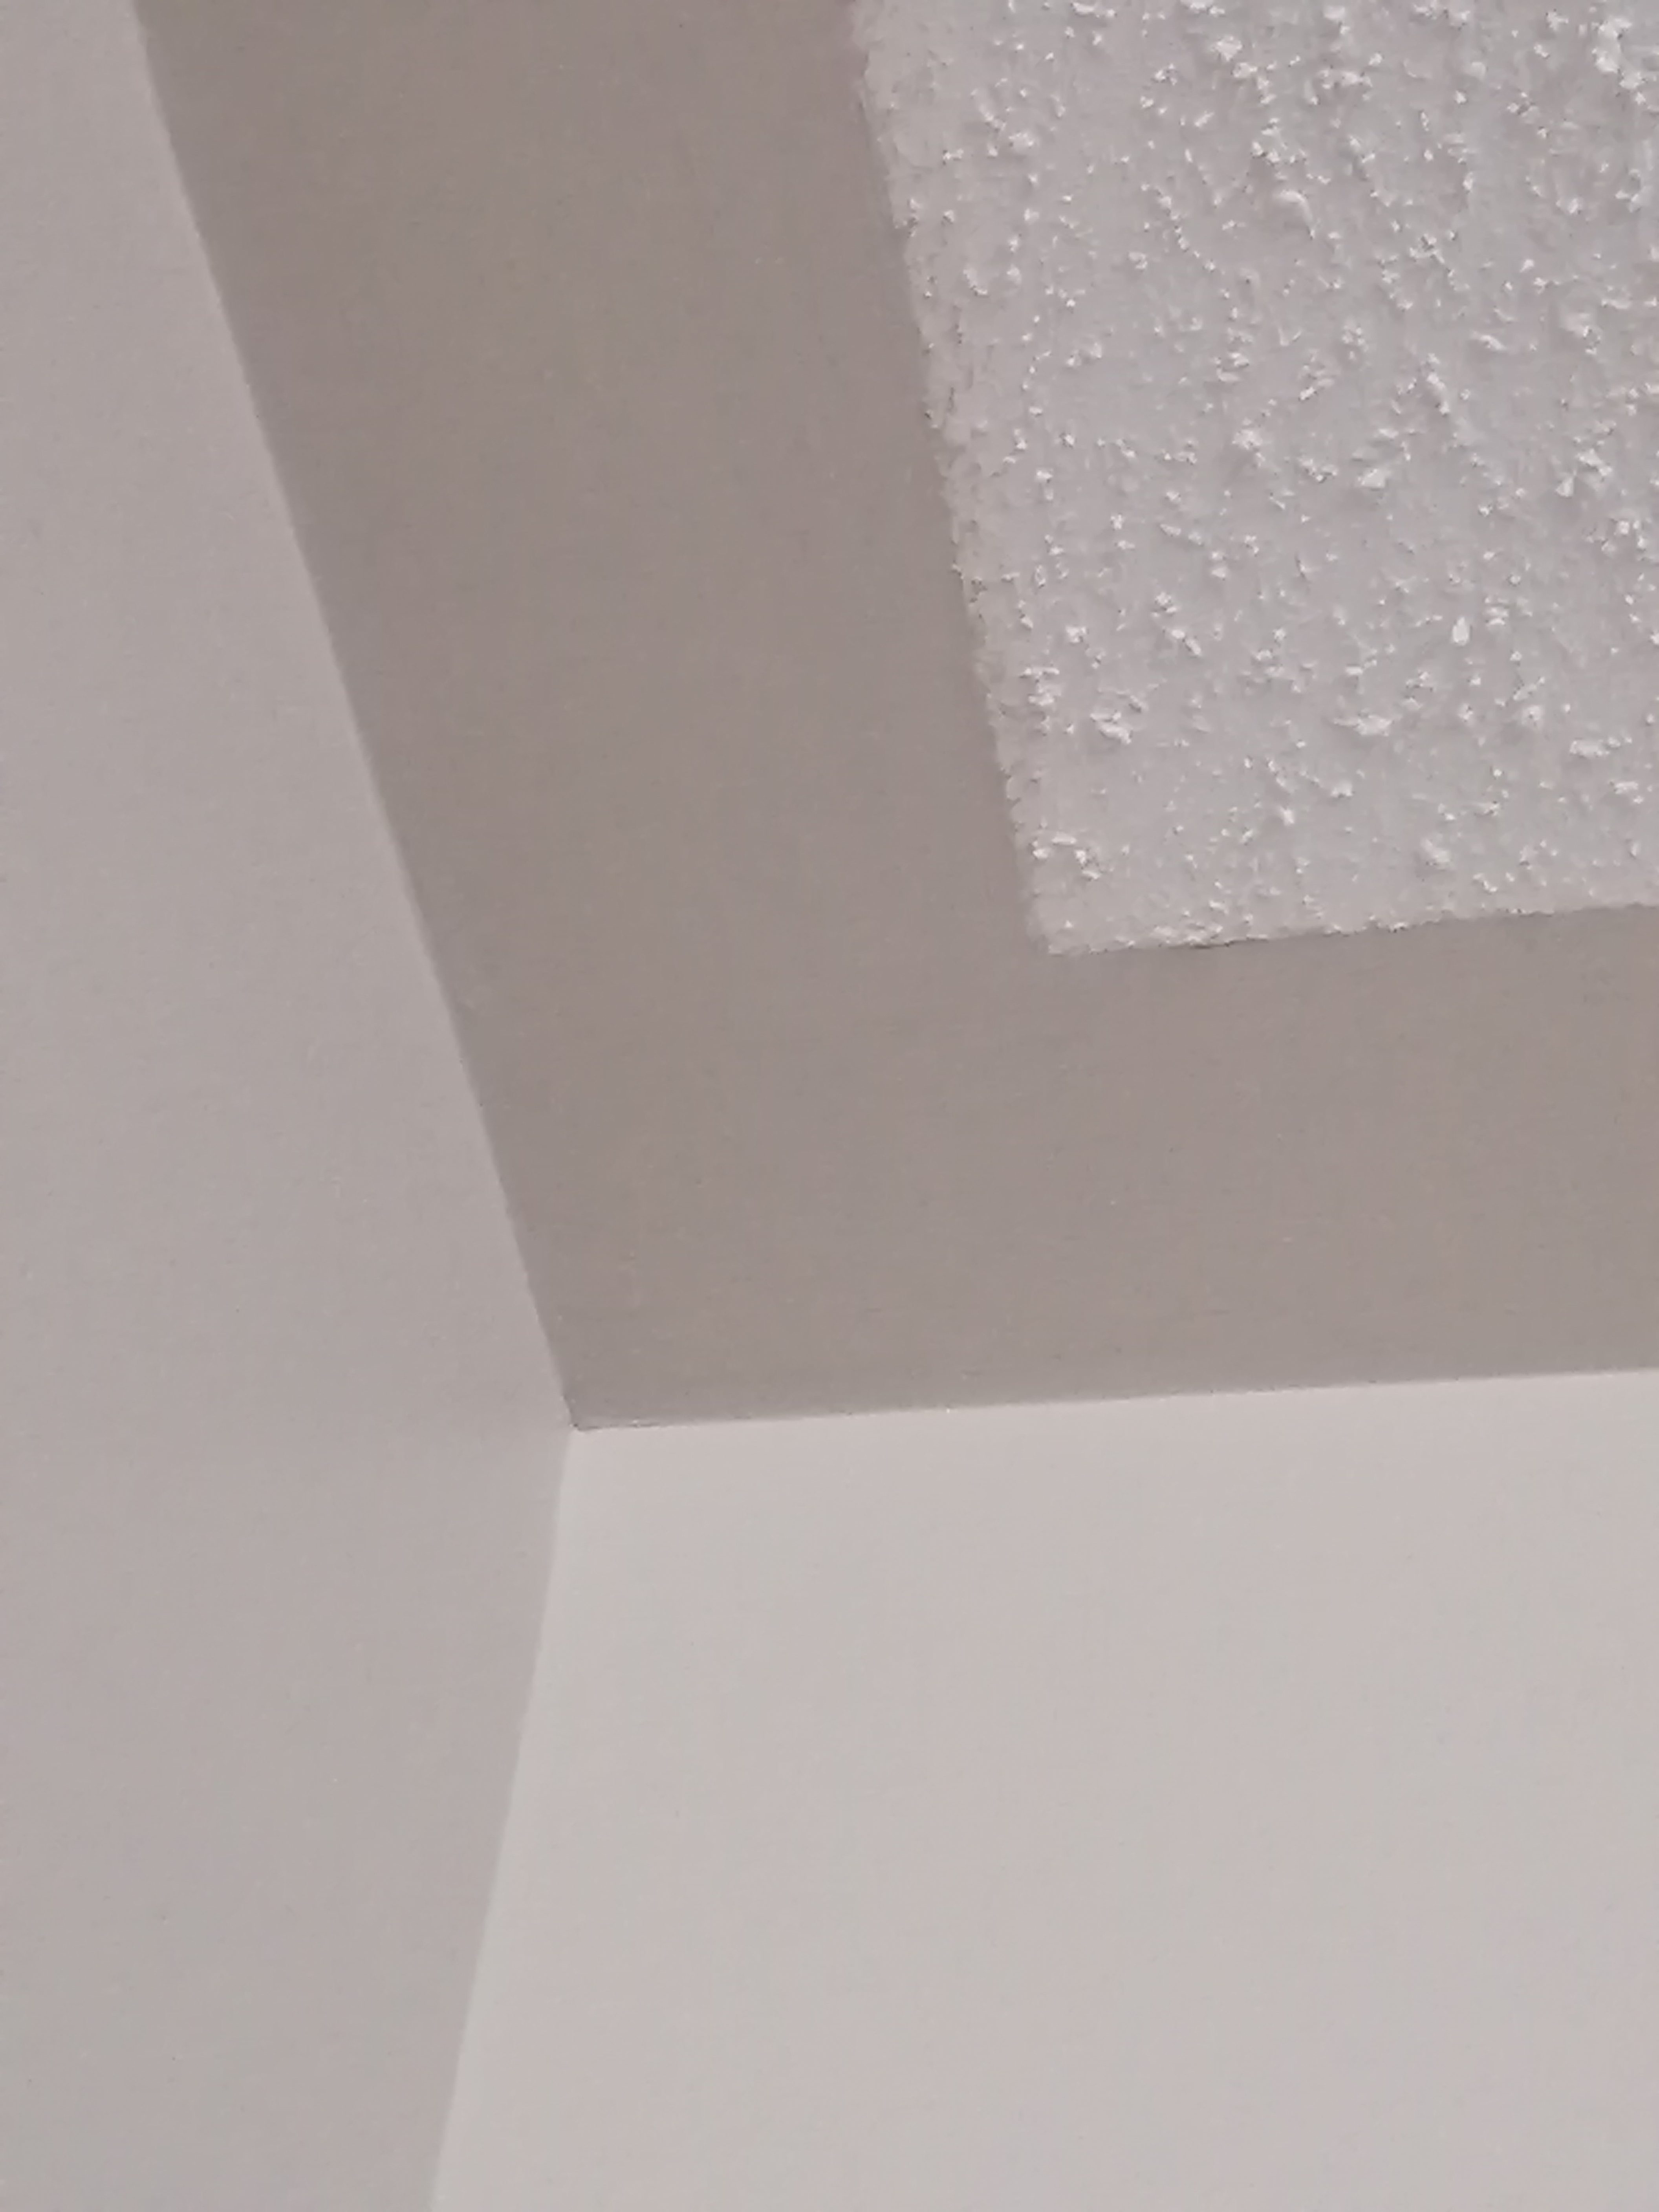 Painting Tips Around Popcorn Ceiling